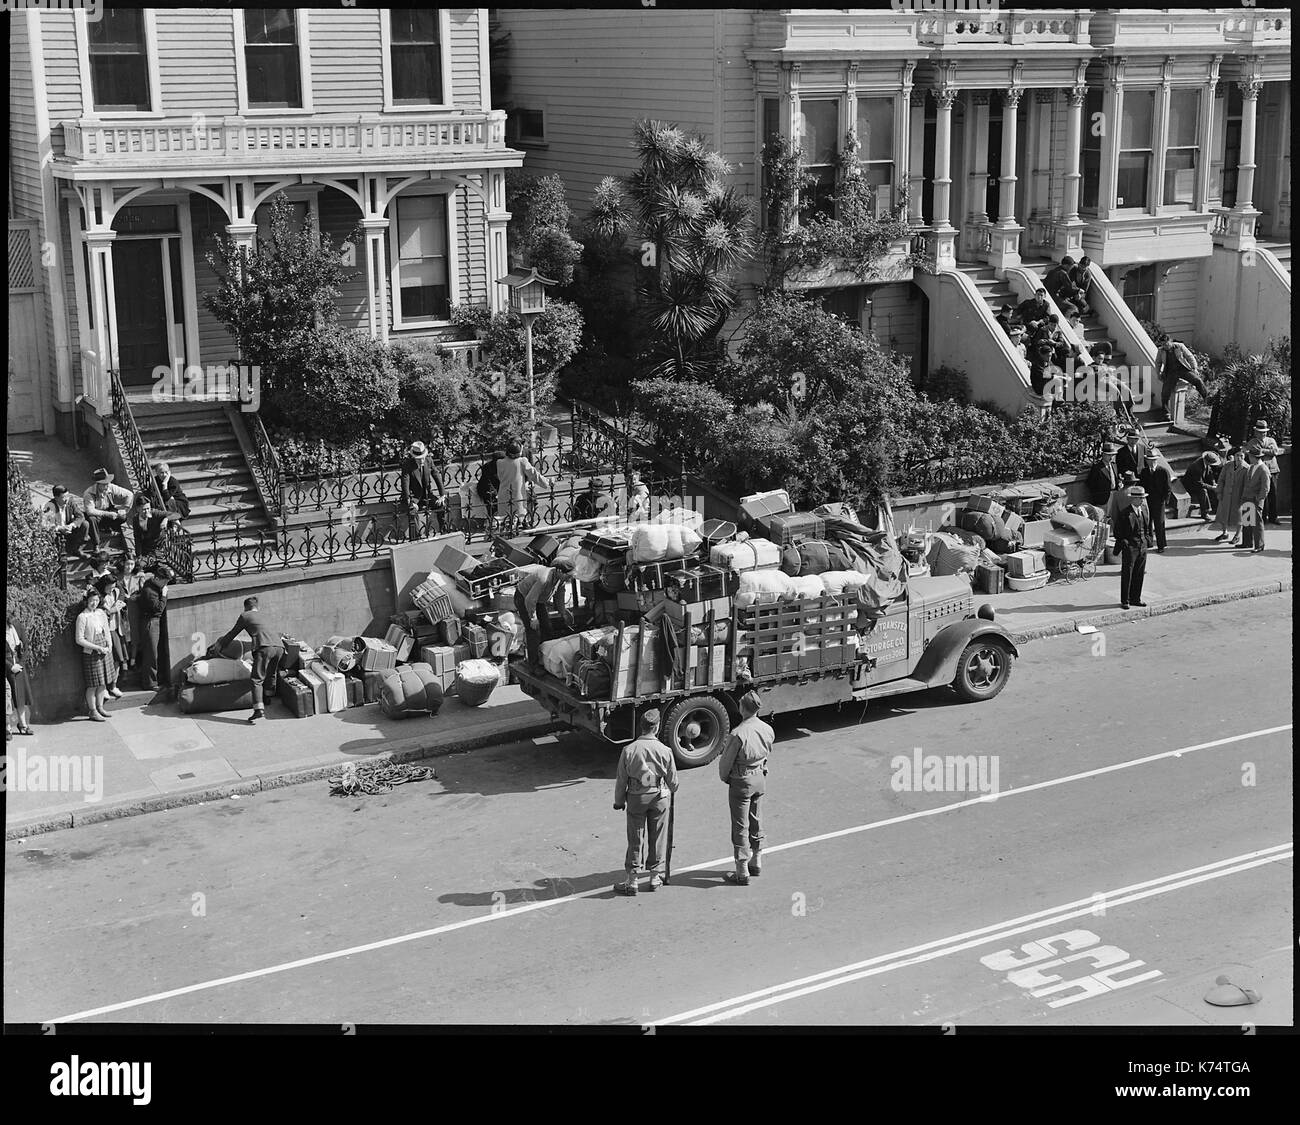 Soldiers guard bed-rolls and luggage of residents being evacuated from the Japanese quarter as evacuees wait for transportation, San Francisco, CA, 4/29/1942. Photo by Dorothea Lange Stock Photo